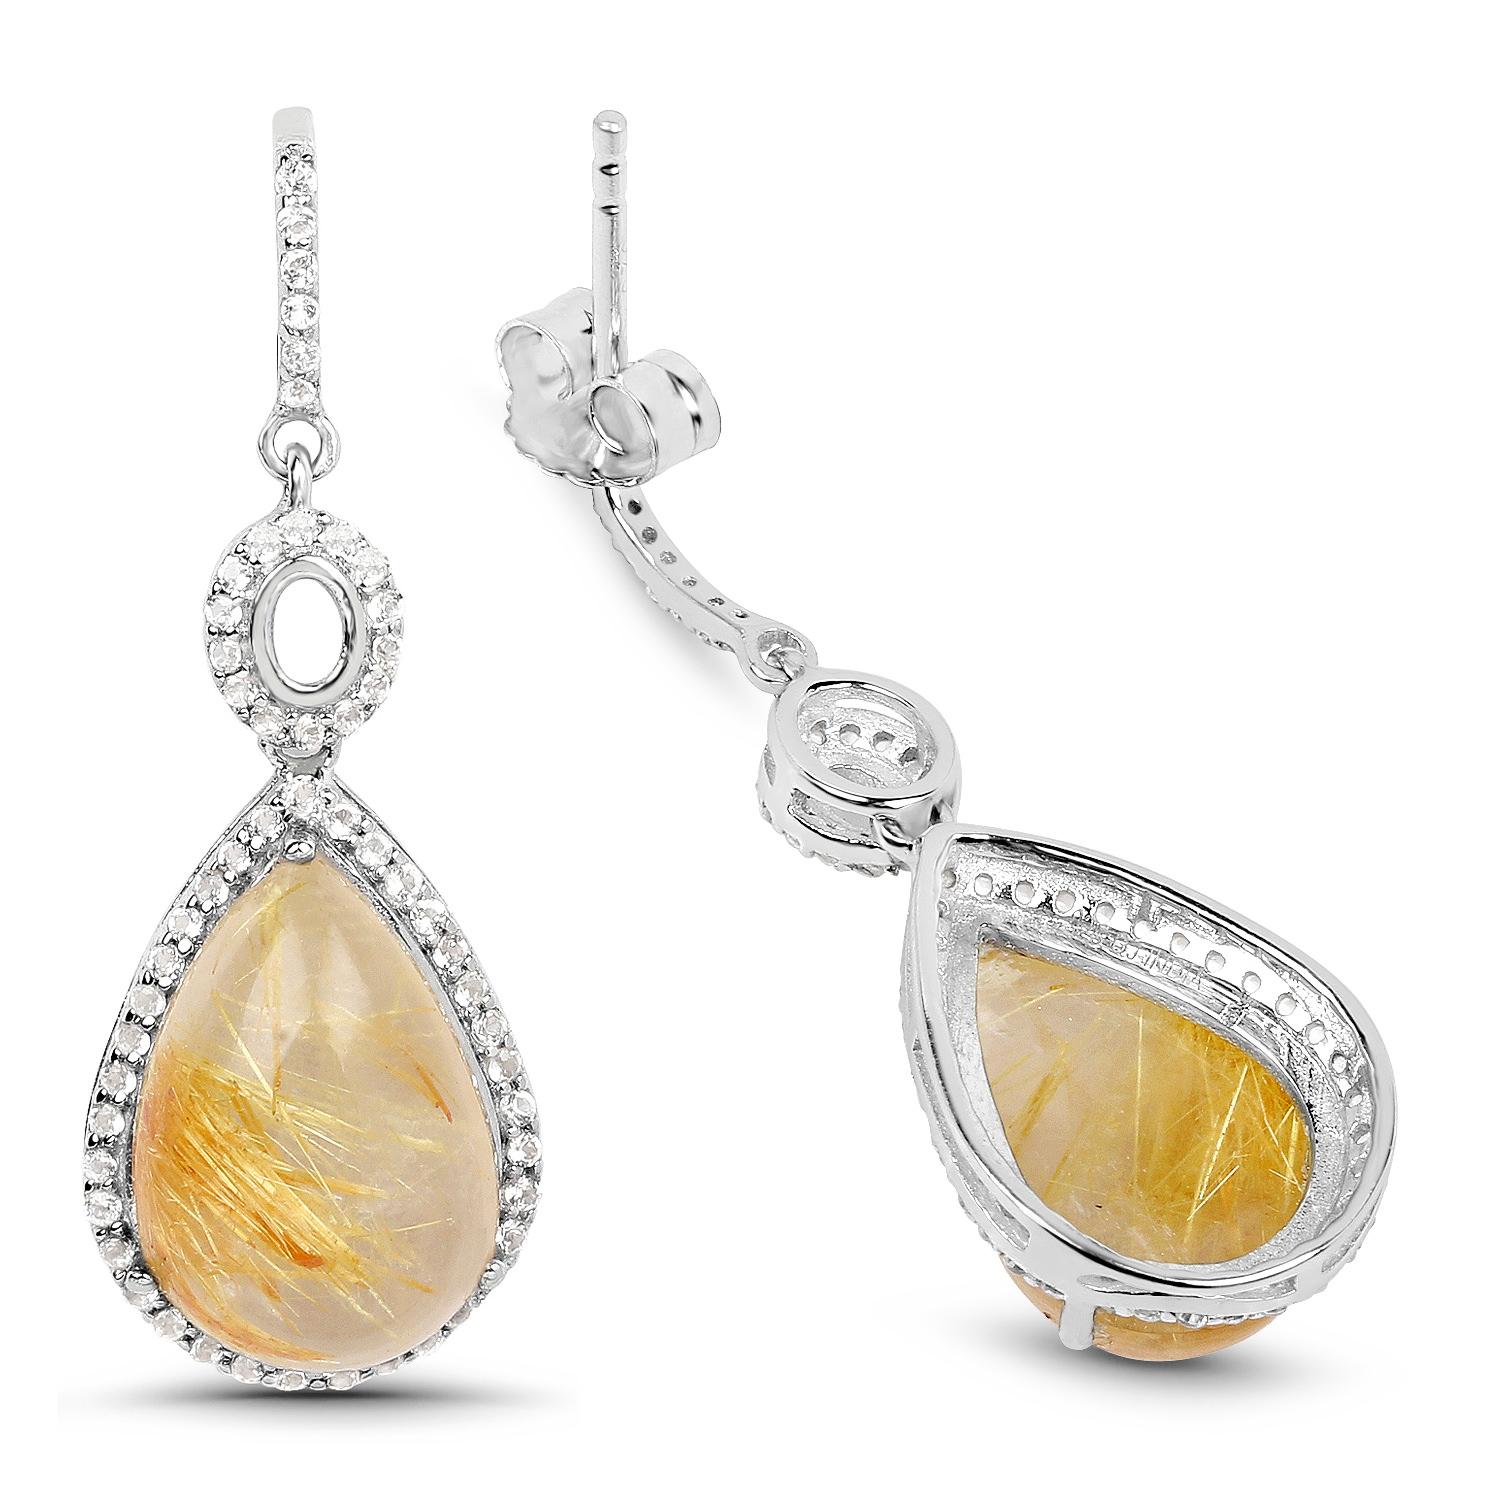 Natural Cabochon Golden Rutile Quartz Dangle Earrings Set with Topaz In Excellent Condition For Sale In Laguna Niguel, CA